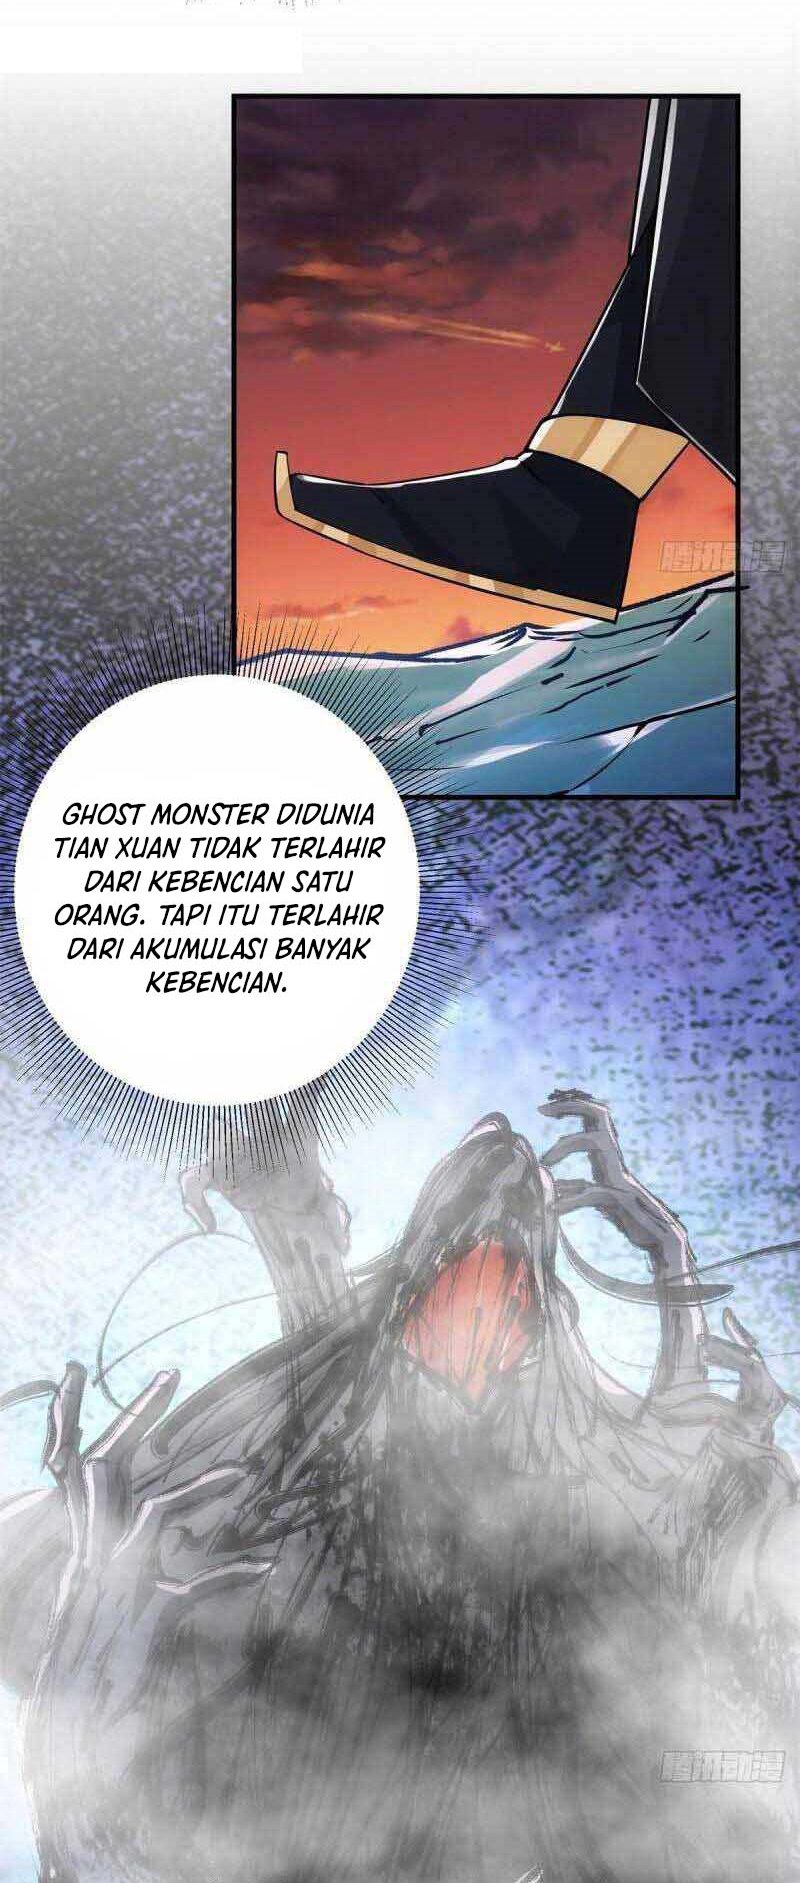 Keep A Low Profile, Sect Leader Chapter 52 Bahasa Indonesia